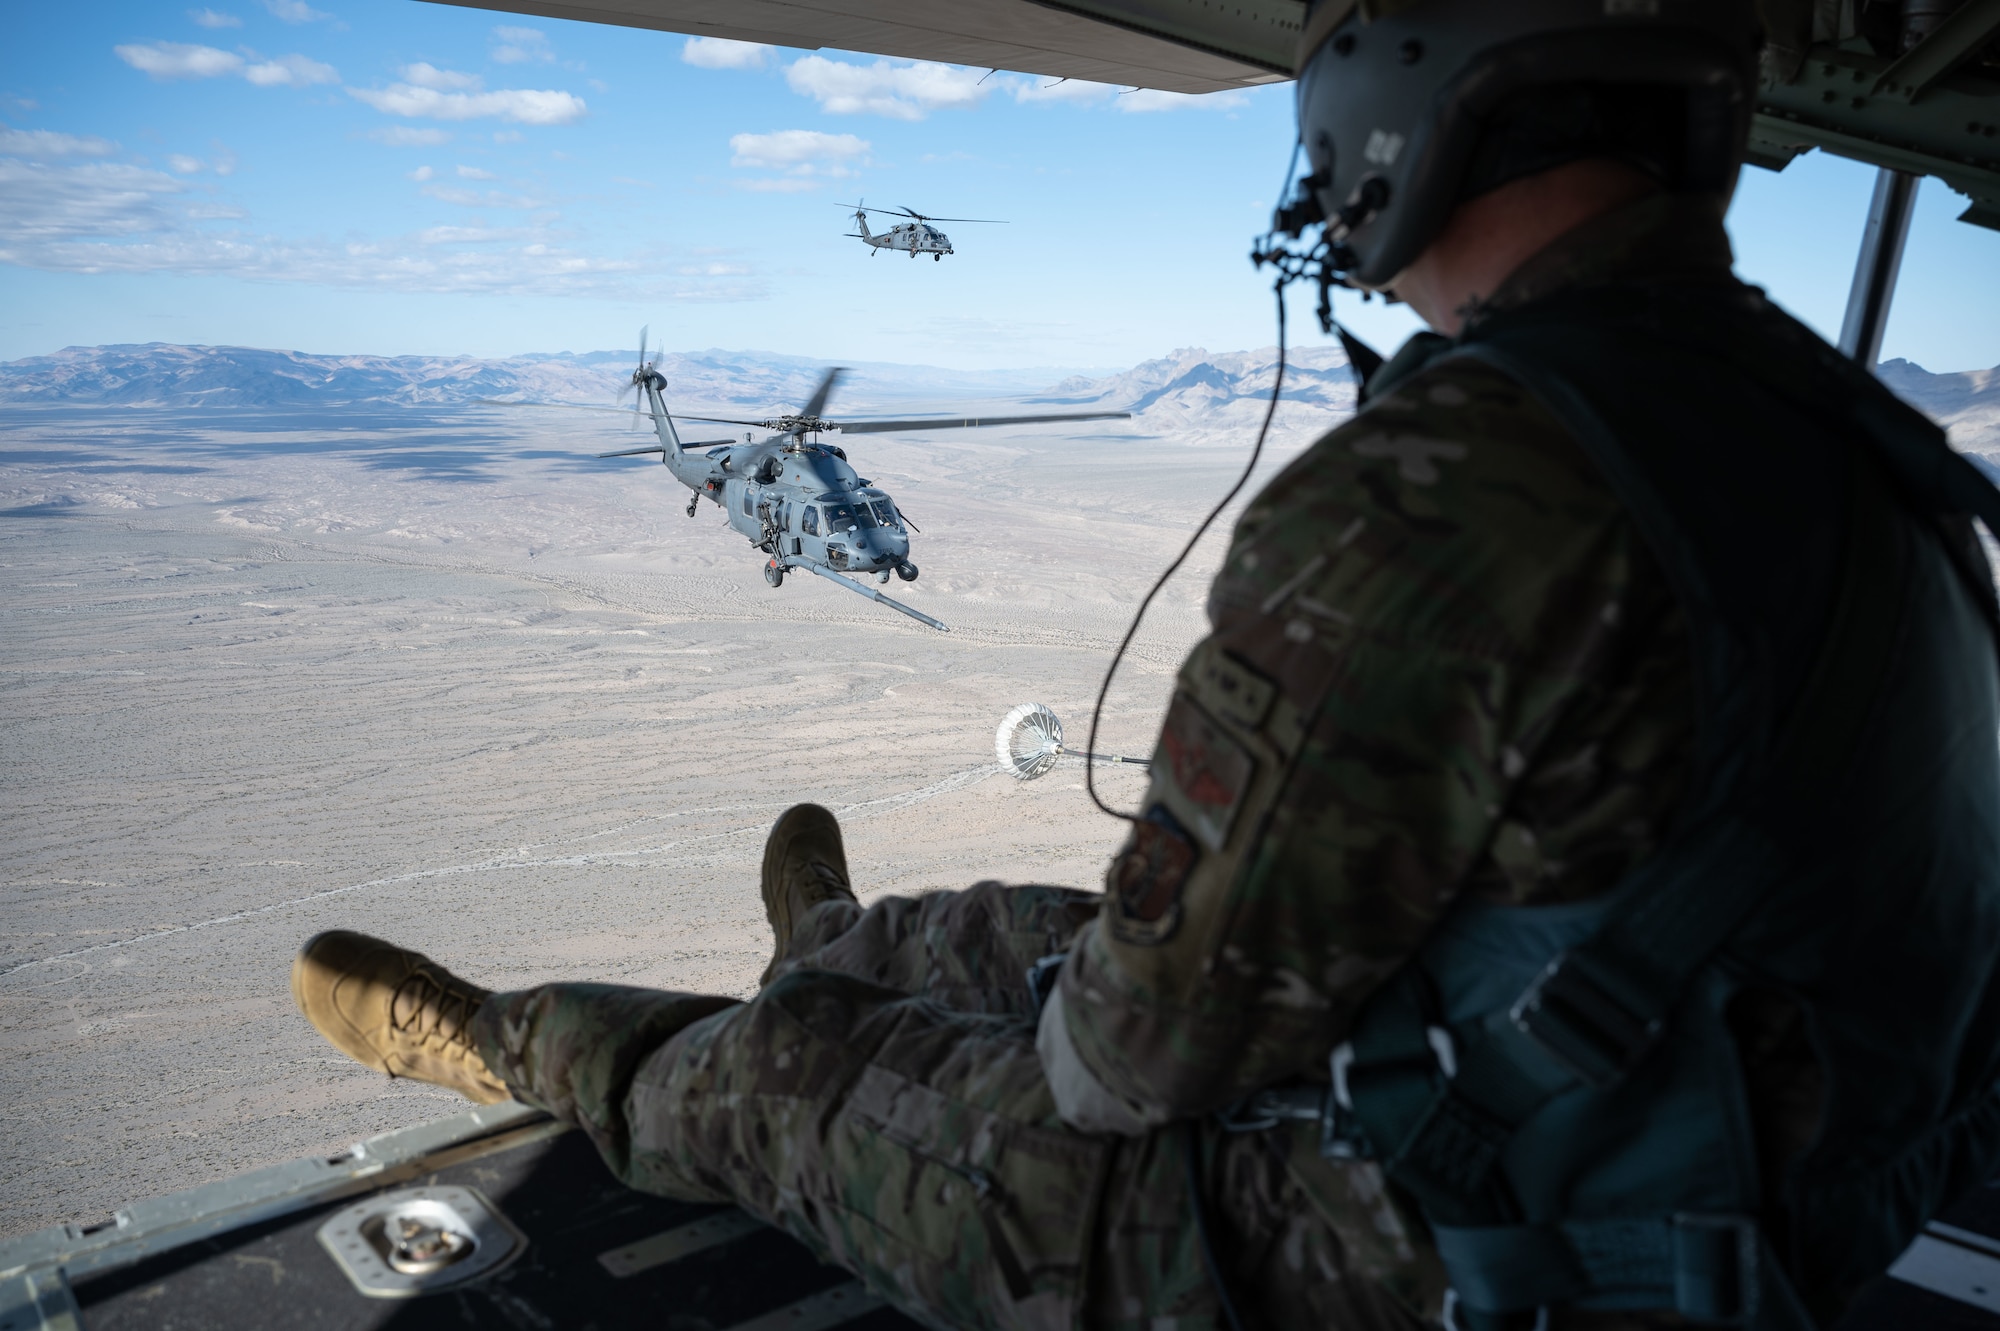 U.S. Air Force Master Sgt. David Williams a loadmaster assigned to the 102nd Rescue Squadron, New York Air National Guard, watches as two HH-60G Pave Hawks engage in refueling operations during Red Flag-Nellis 23-2 at Nellis Air Force Base, Nevada, March 16, 2023.